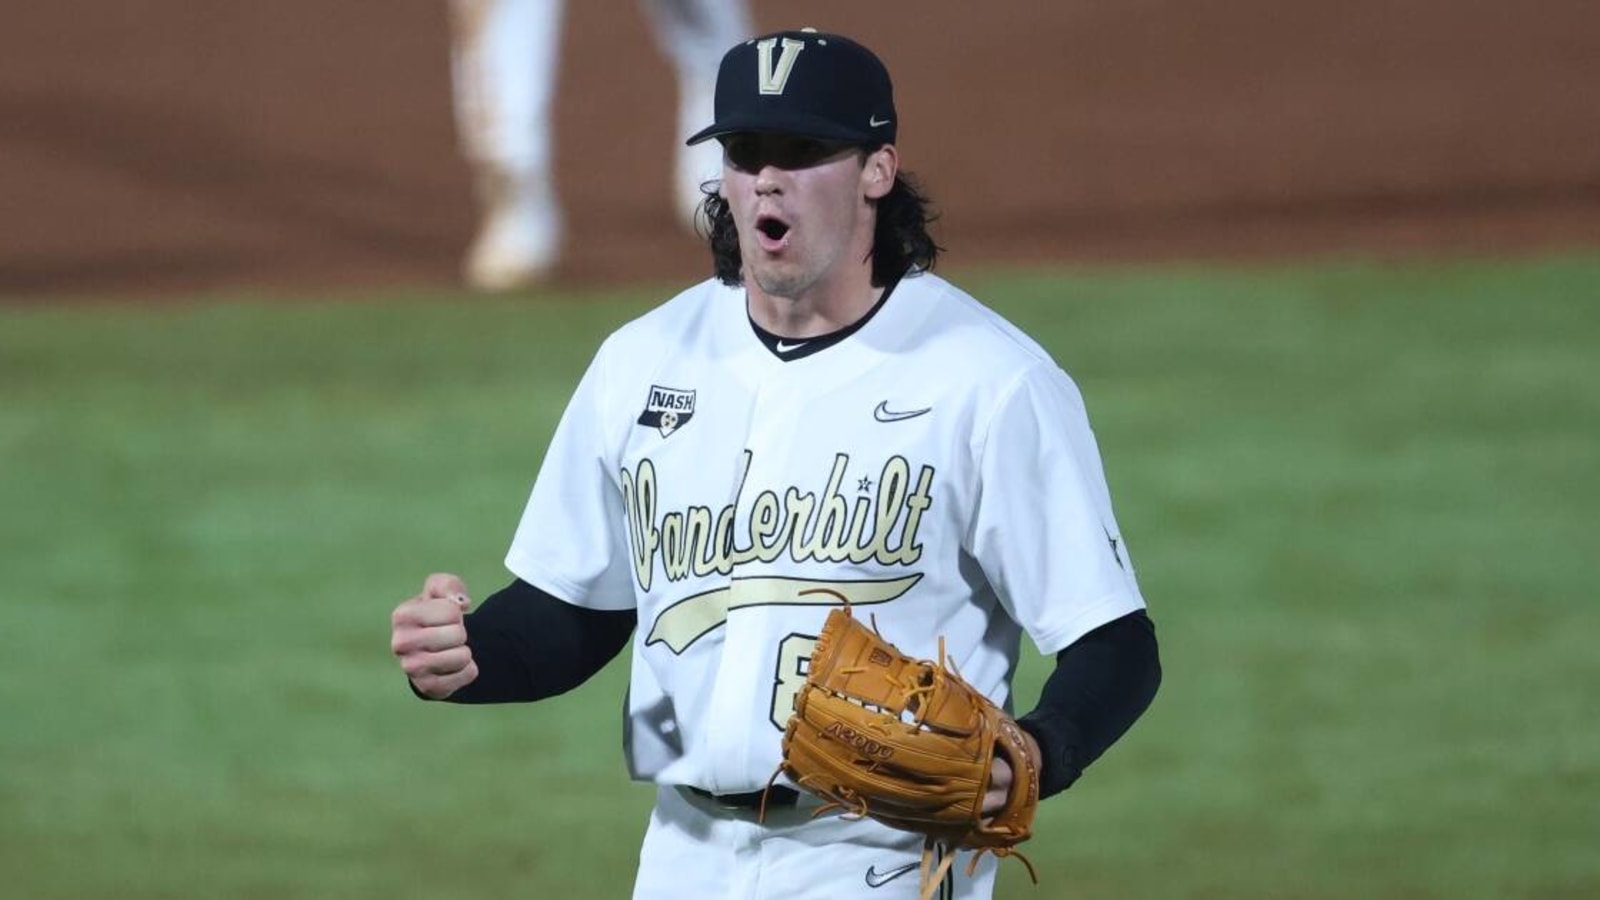 Vanderbilt pitcher Patrick Reilly selected by Pittsburgh Pirates in 2023 MLB Draft